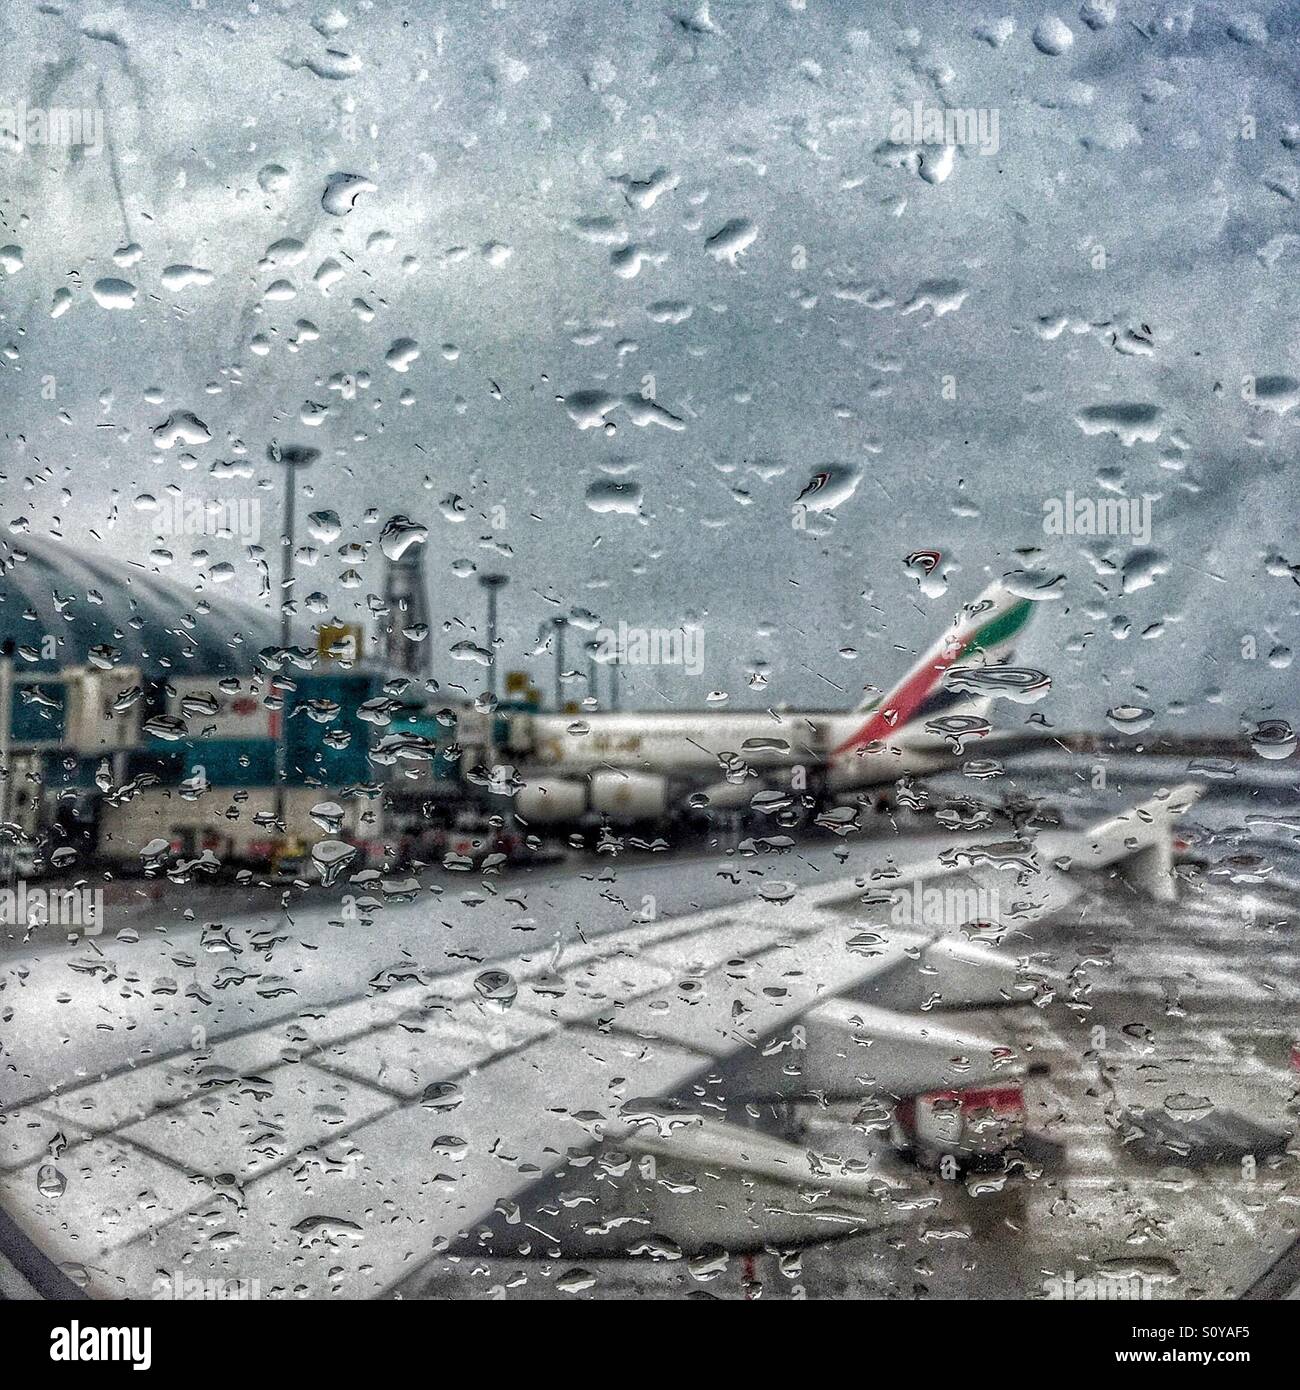 Parked Emirates Airline's plane seen through the rainy aircraft window at Dubai International Airport Stock Photo